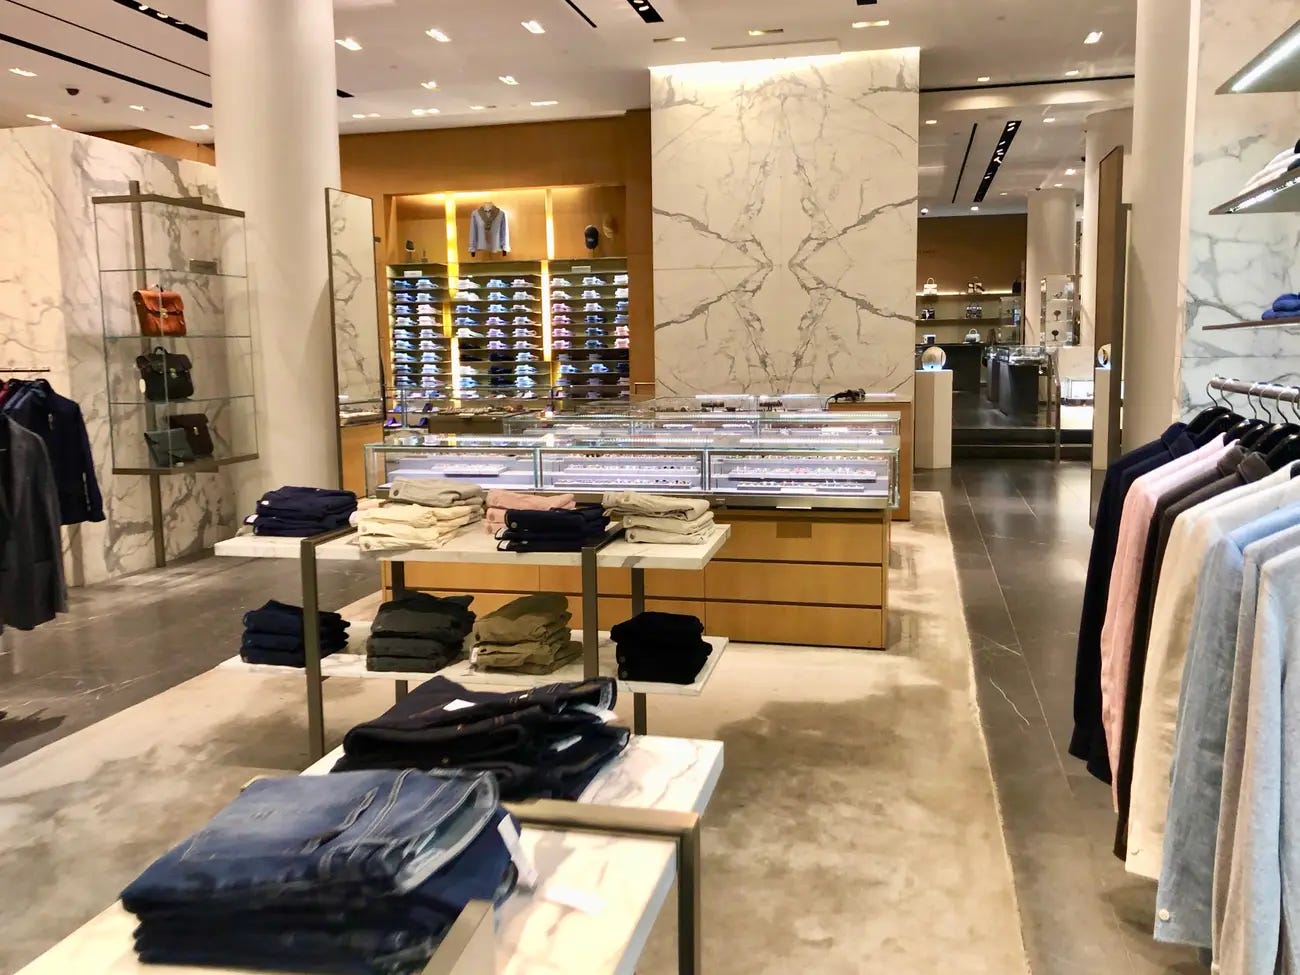 This image depicts the first floor interior of Barneys flagship store on Madison Ave. Neat piles of denim and casual pants are layered on tables with shelves of formal shirting in many colors displayed on a wall in the distance.